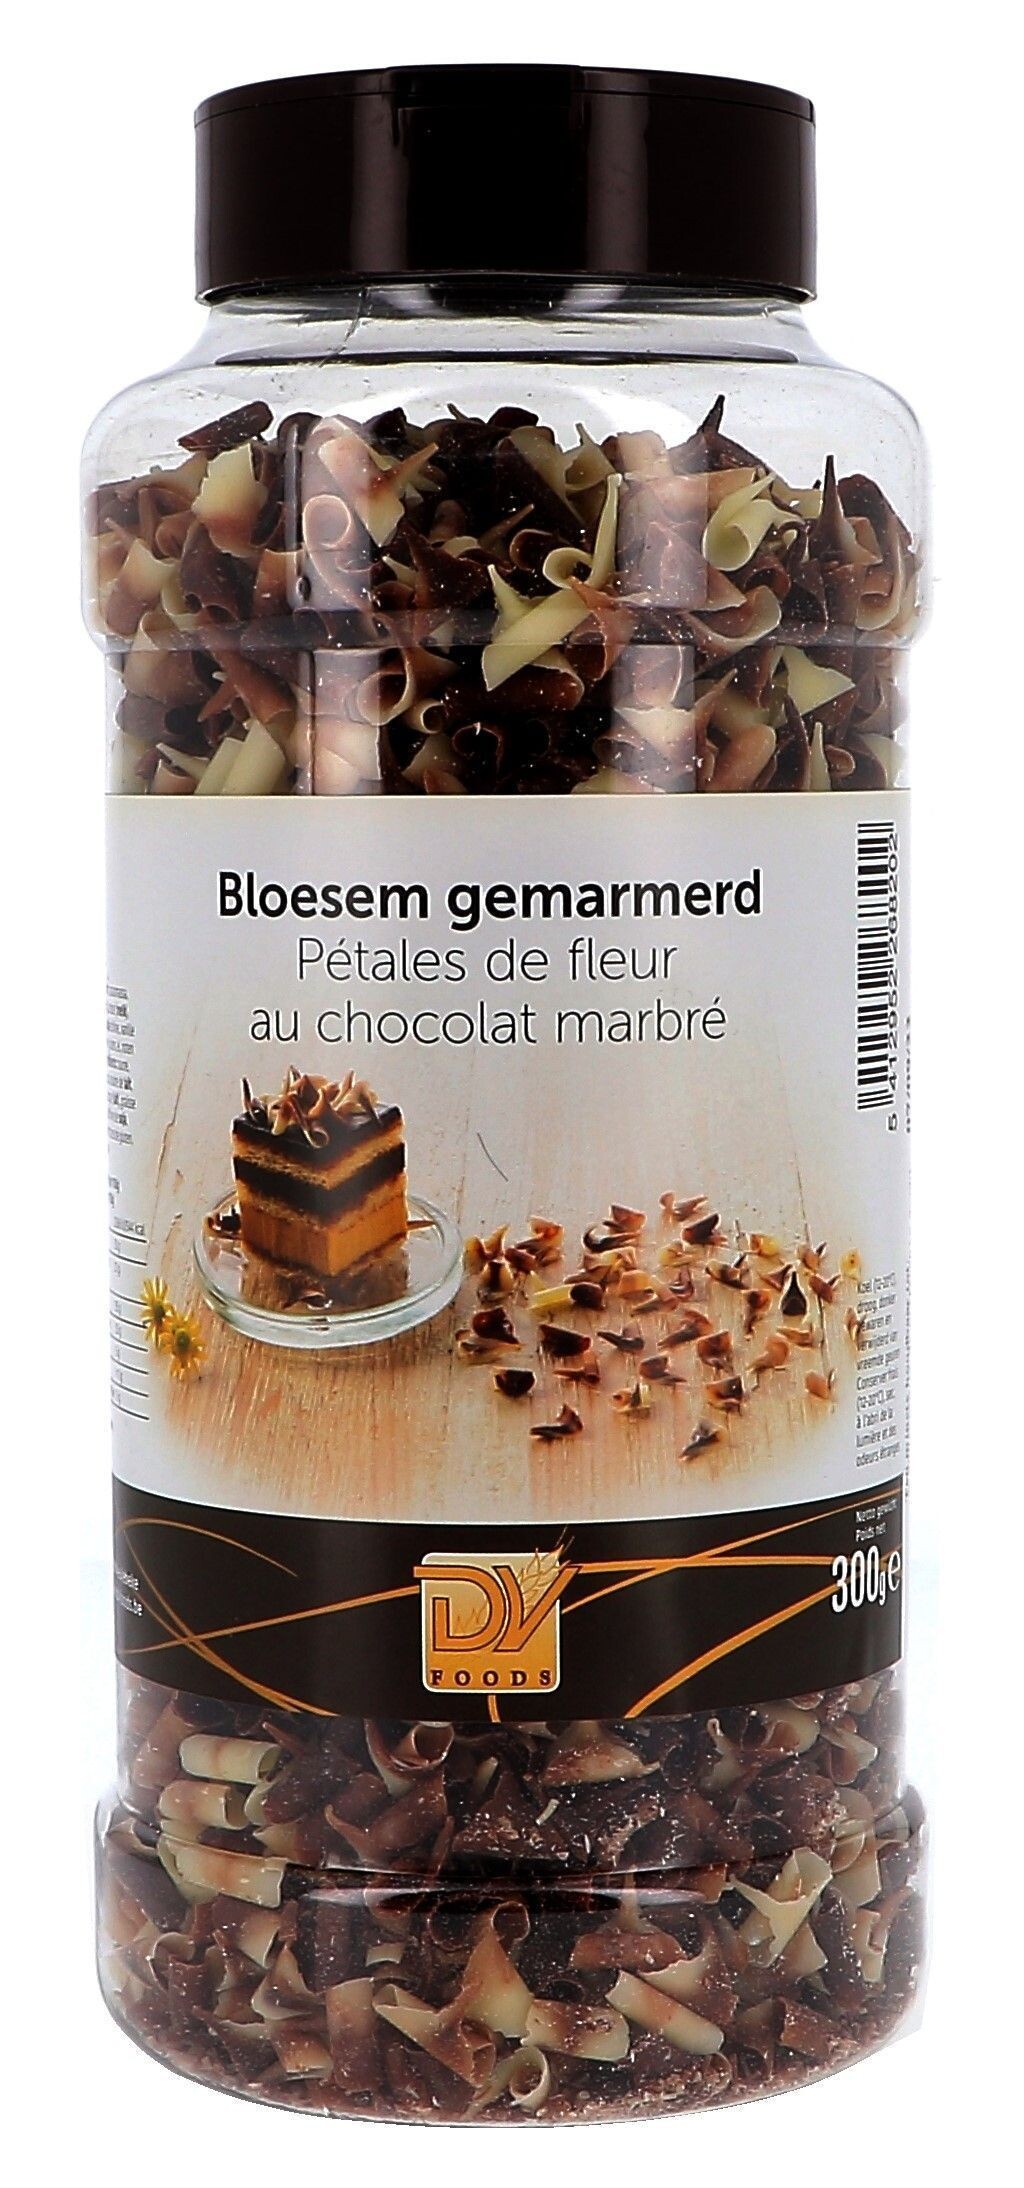 Chocolate blossom marbled 300gr DV Foods